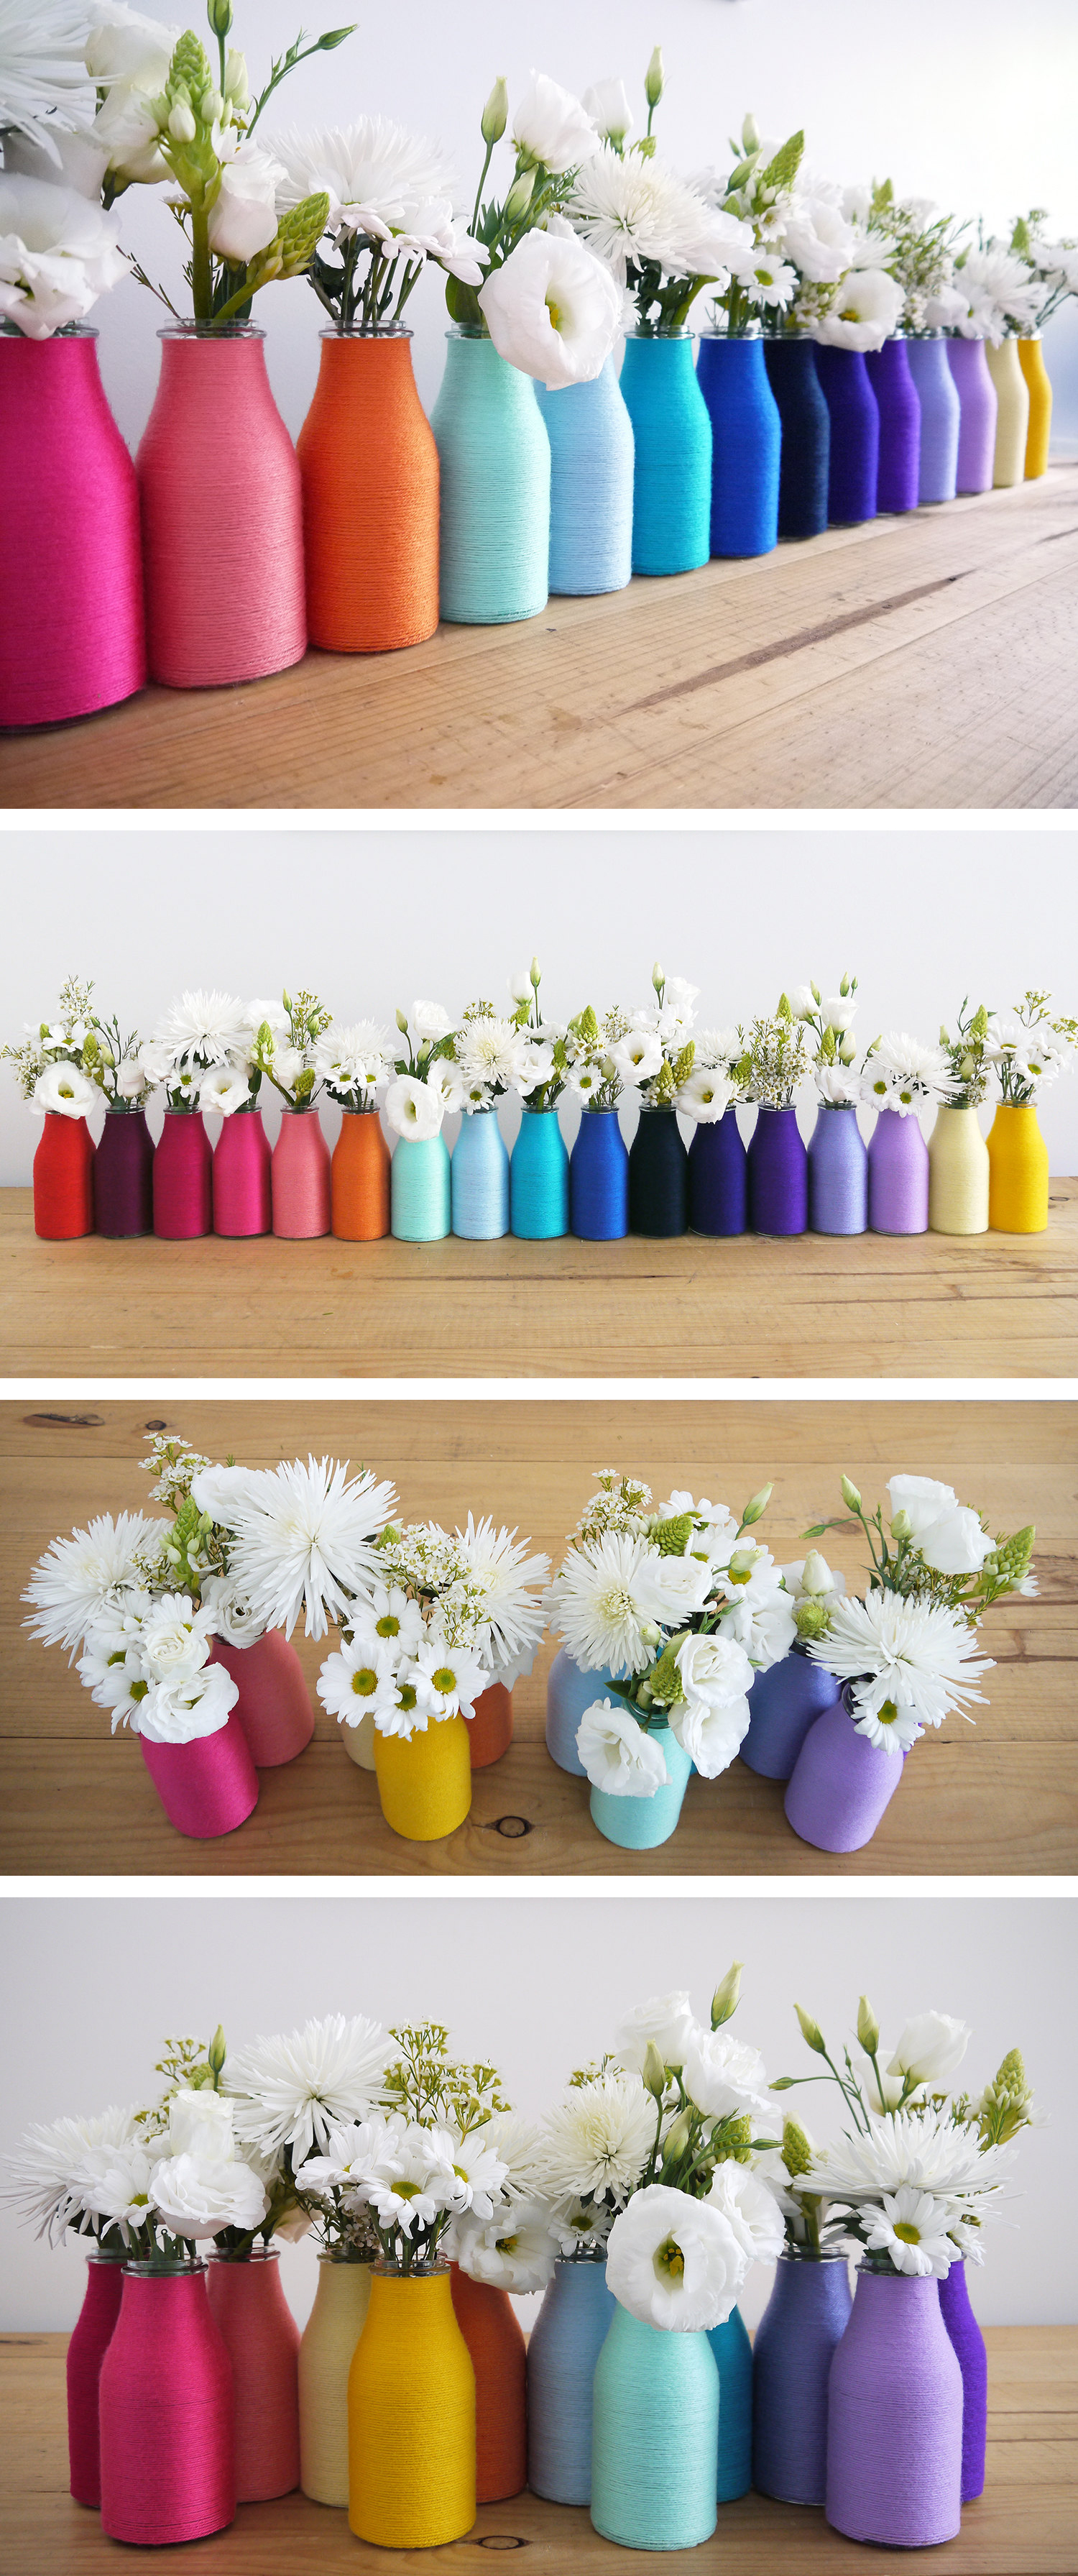 Rainbow wool wrapped jars | The Colour Curator on Etsy